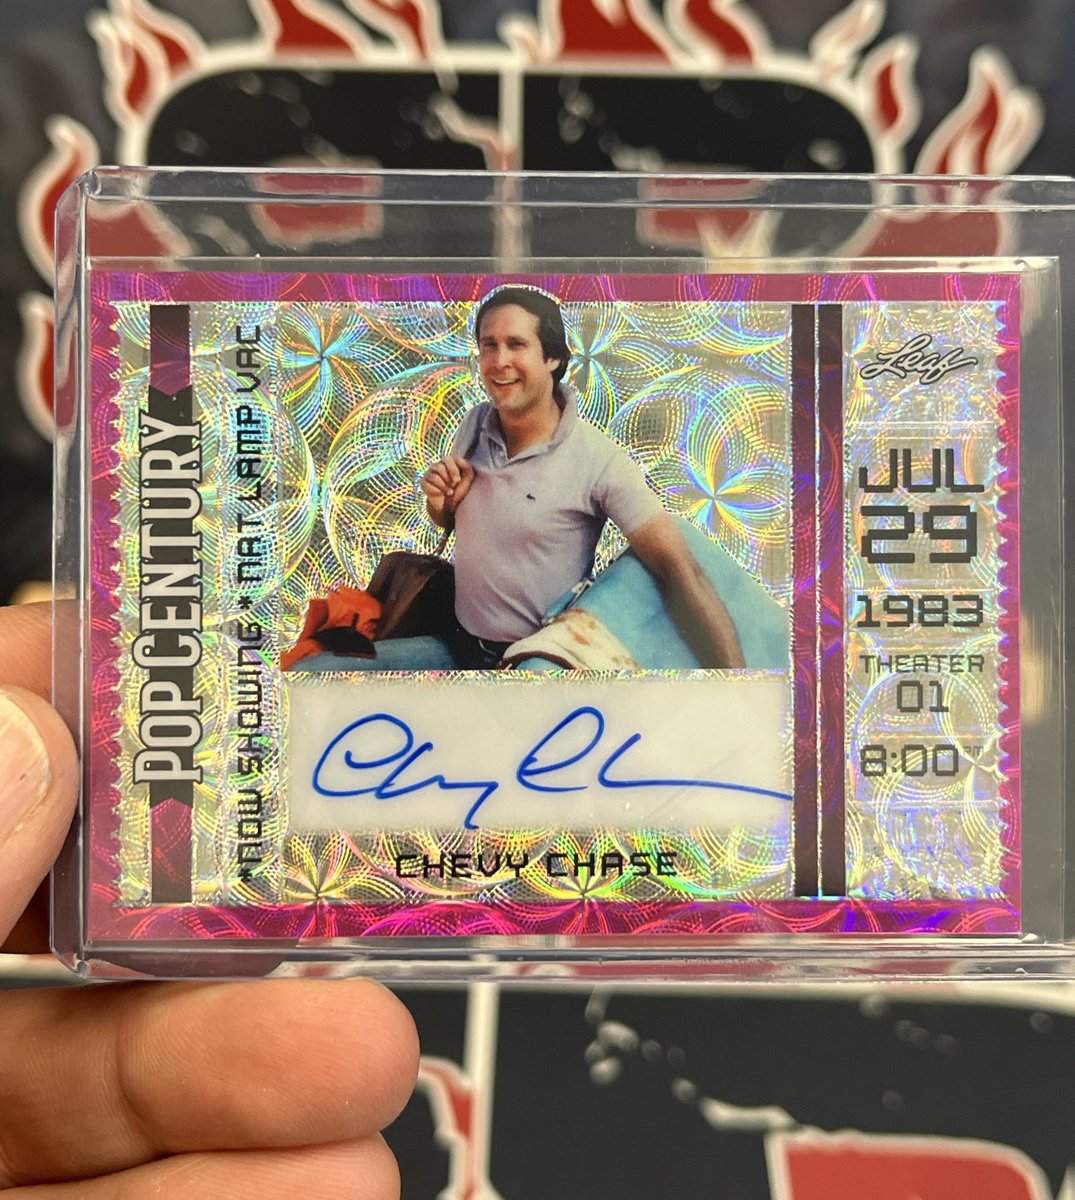 Chevy Chase as Clark Griswold Pink Kaleidoscope Auto /7 pulled today in our @Leaf_Cards Pop Century Breaks! 💥💥 @ChevyChaseToGo #chevychase #nationallampoons #movies #actor #autograph #groupbreaks #boxbreaks #casebreaks #thehobby #popcentury #like #collect